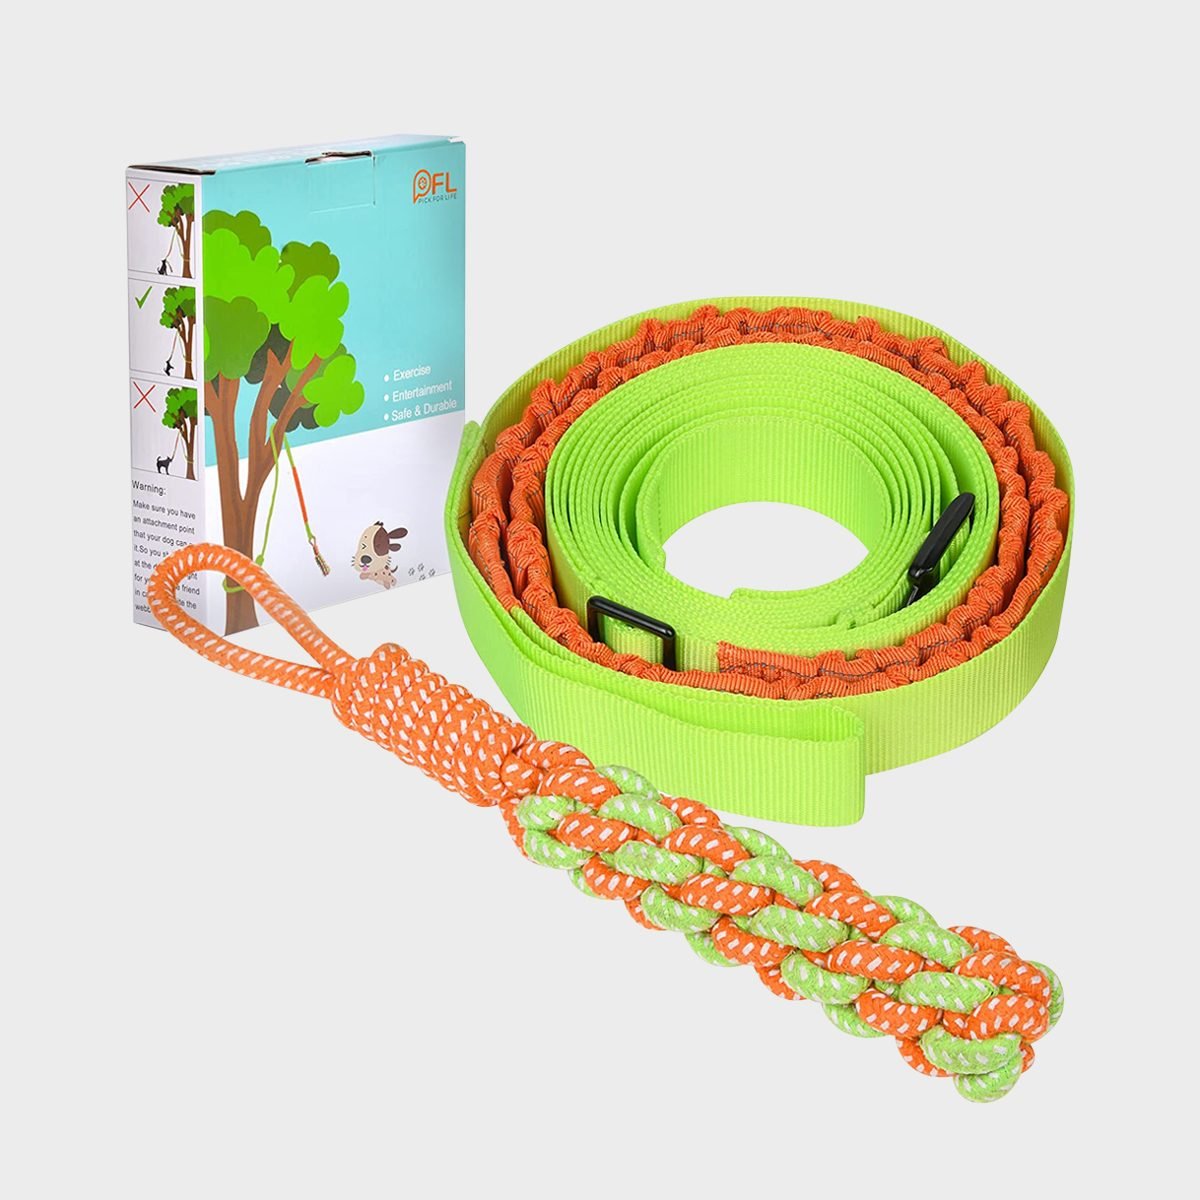 https://www.rd.com/wp-content/uploads/2022/06/Dog-Bungee-Tug-Toy-Outdoor-Interactive-Tether-Tug-of-War-Toy-ecomm-amazon.com_.jpg?fit=700%2C700